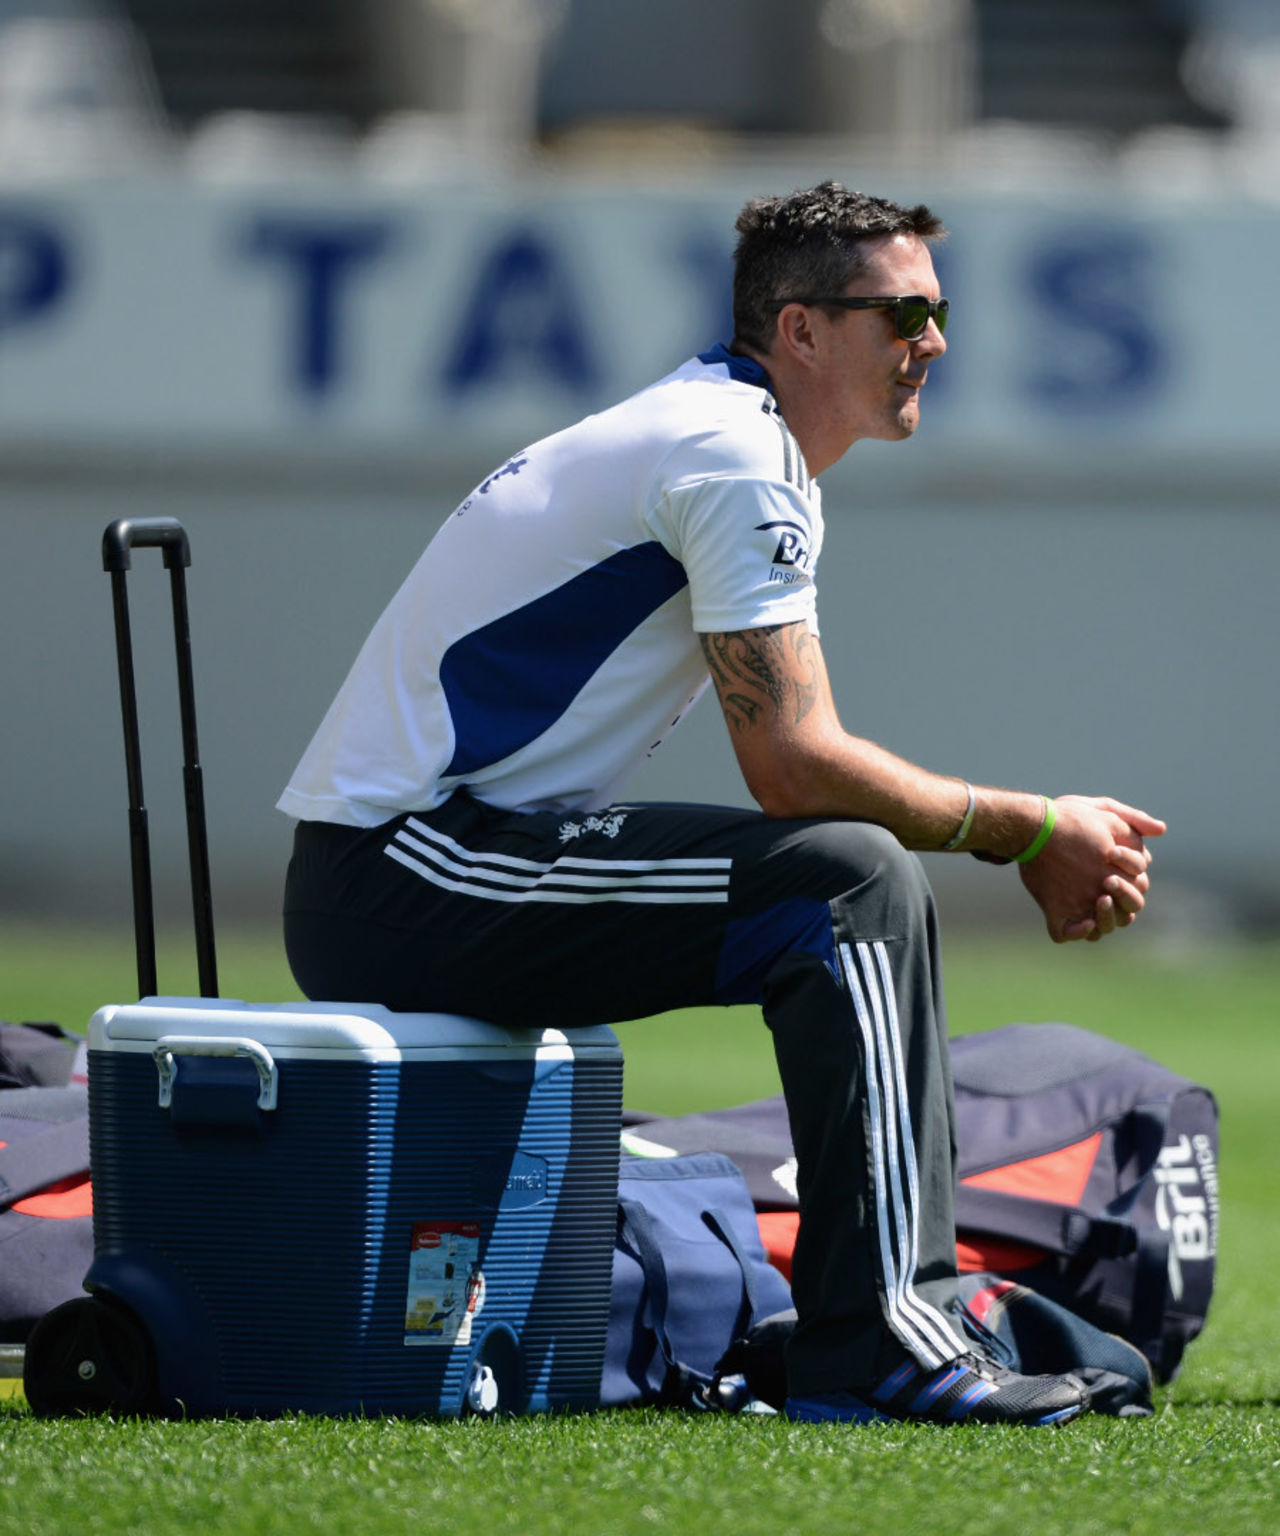 Kevin Pietersen made a final appearance at training before flying home, Auckland, March 21, 2013